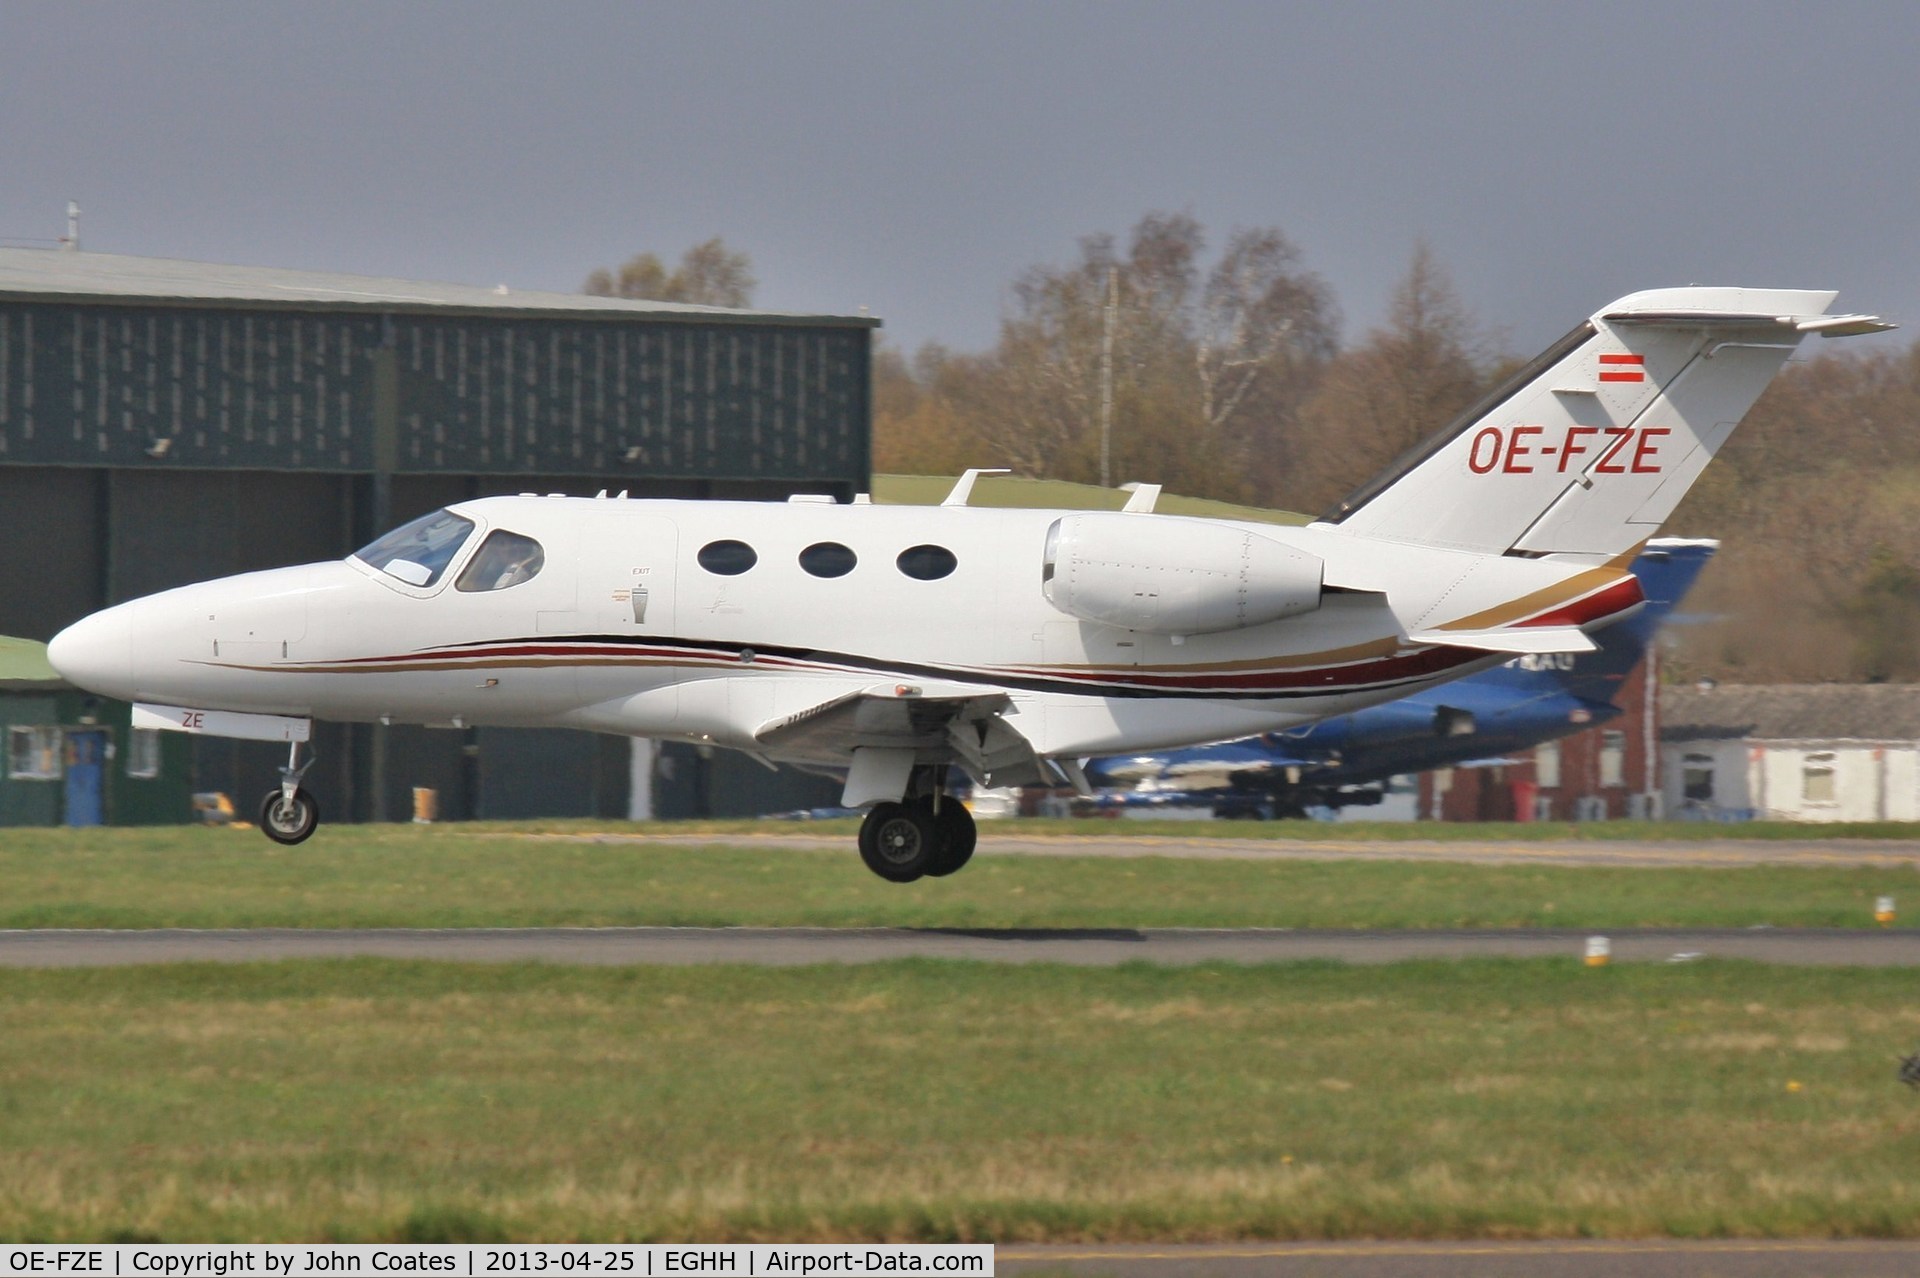 OE-FZE, 2009 Cessna 510 Citation Mustang Citation Mustang C/N 510-0217, About to touchdown 26